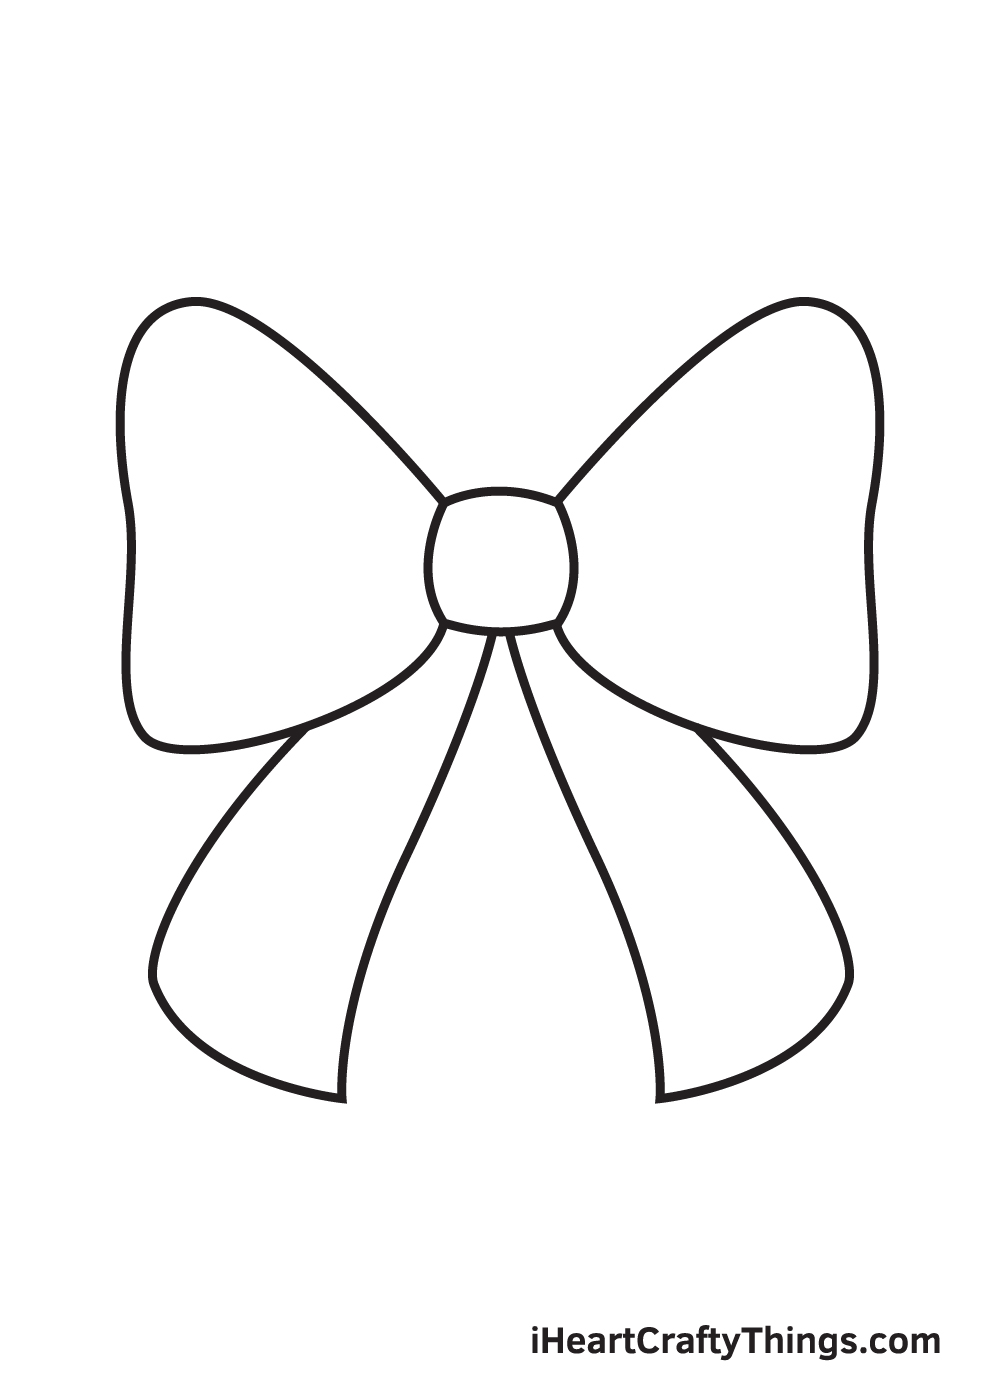 How to draw a Bow In Pencil Simple and three options